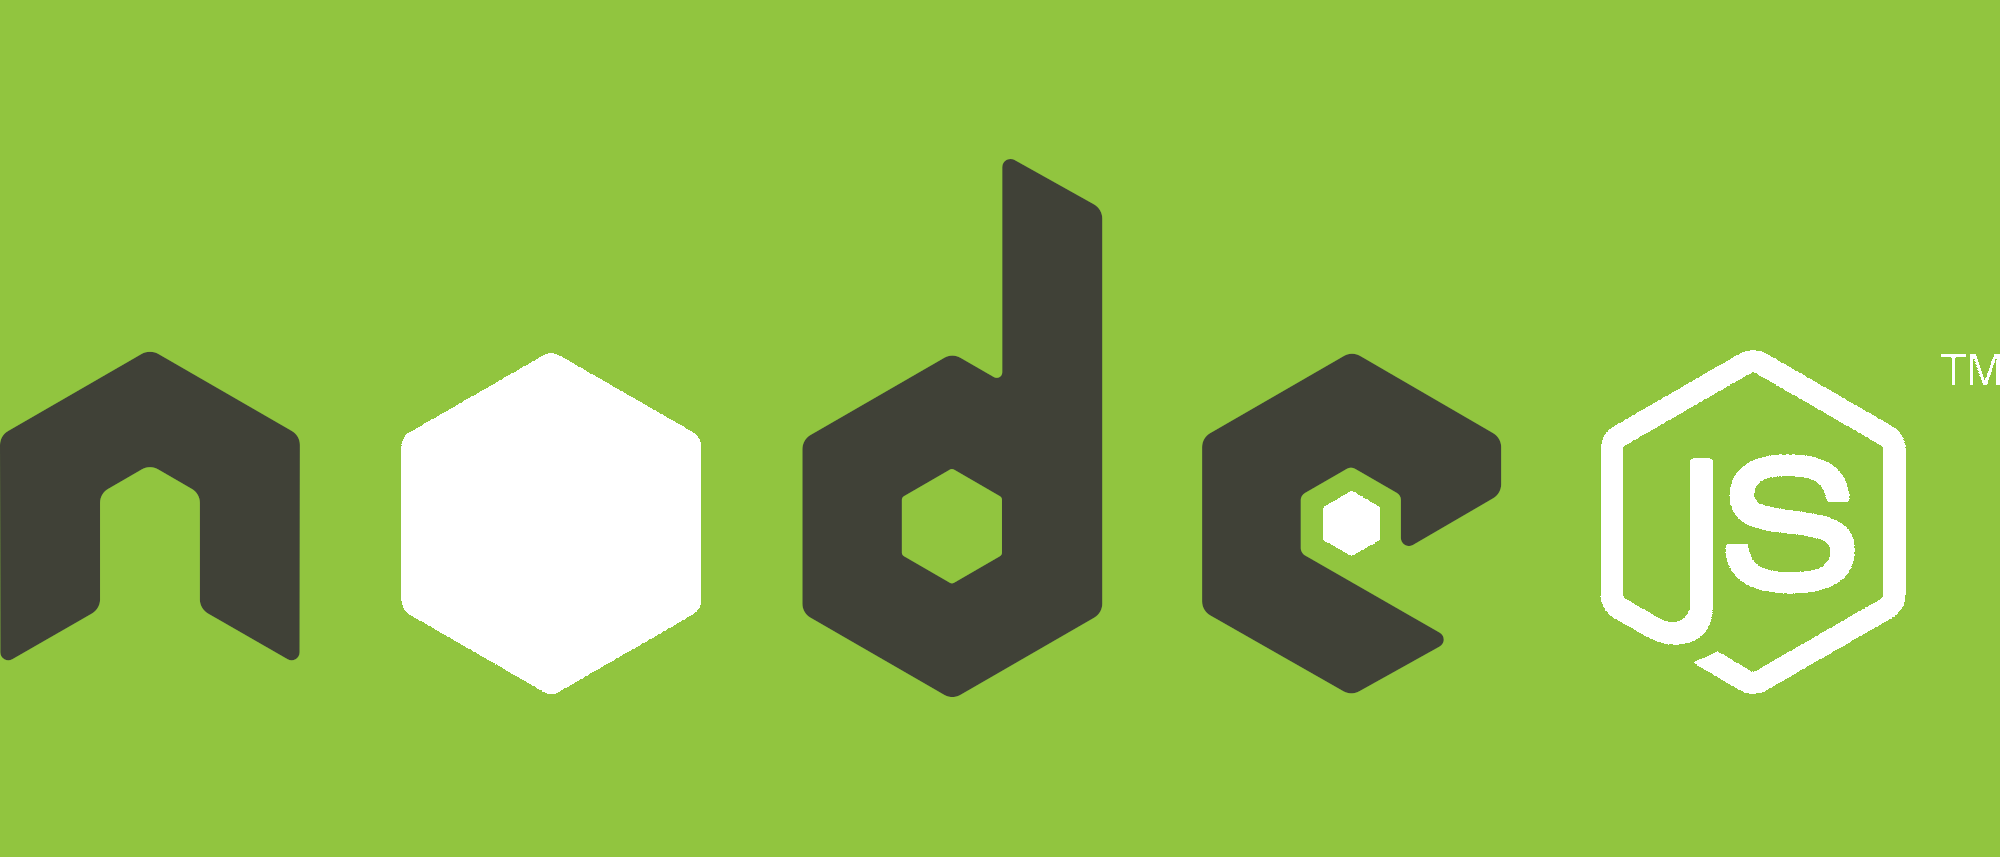 Node.js: implementing a login verification code with ExpressJS and MongoDB